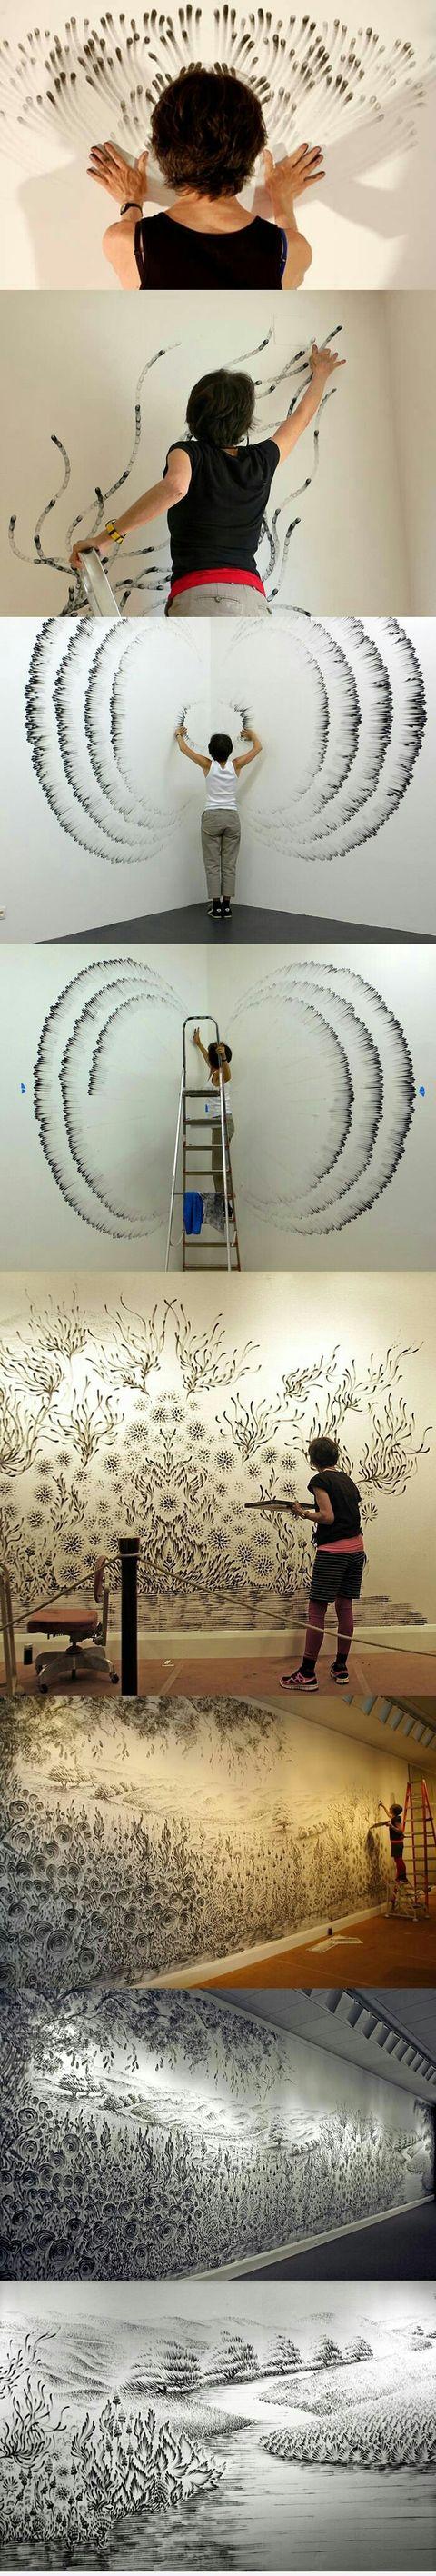 Taking finger painting to a whole new level.